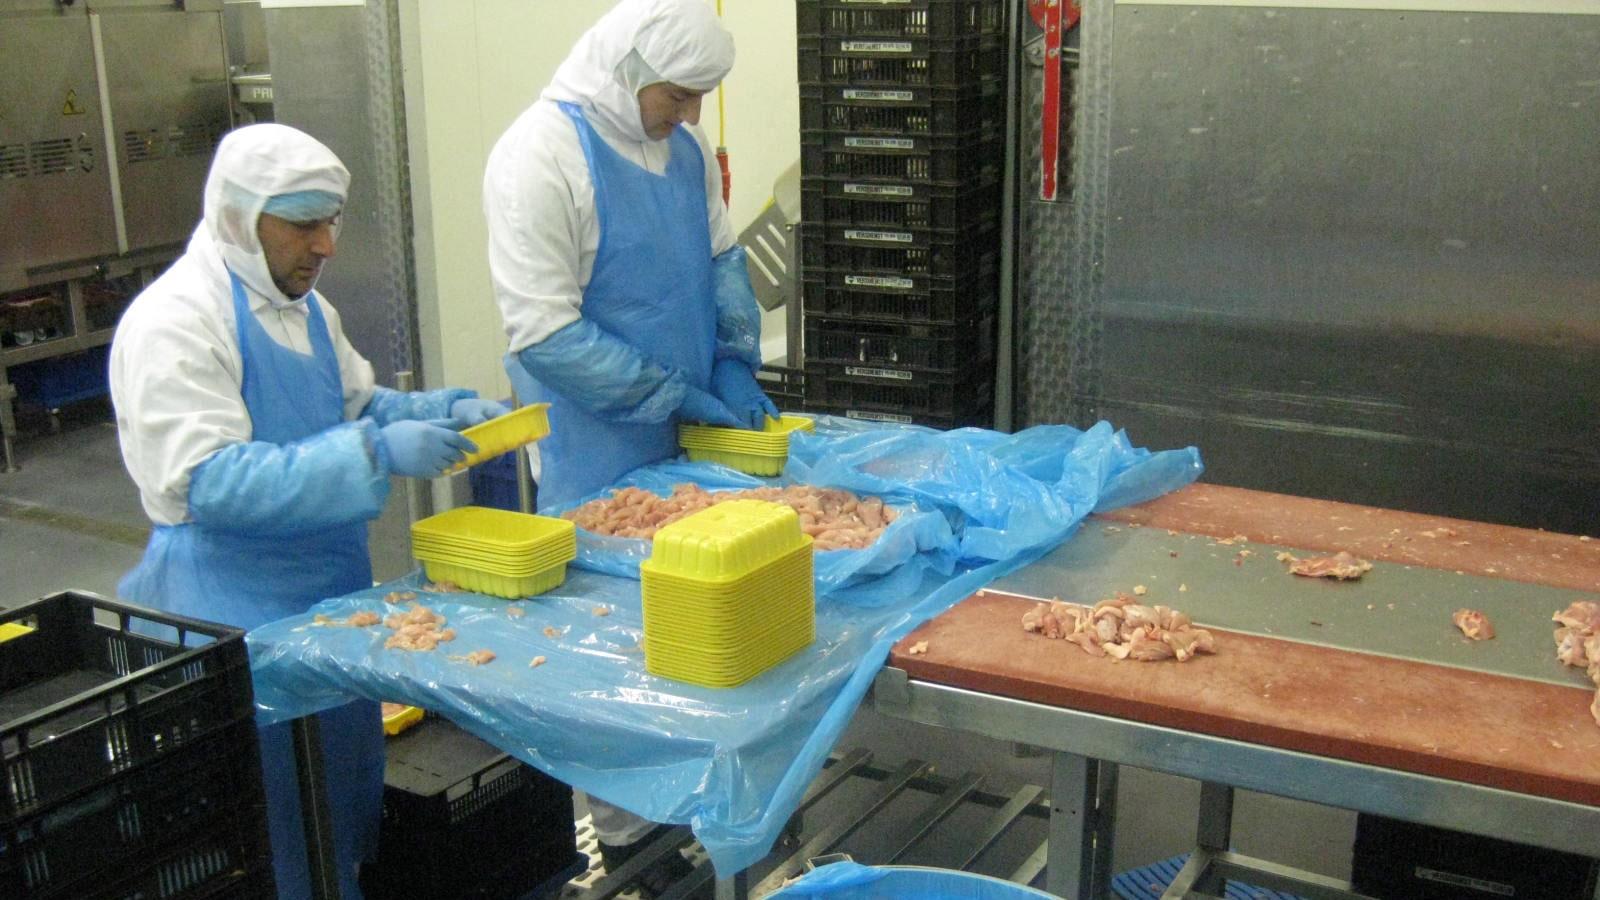 Two men with blue plastic aprons sorting chicken at assembly line